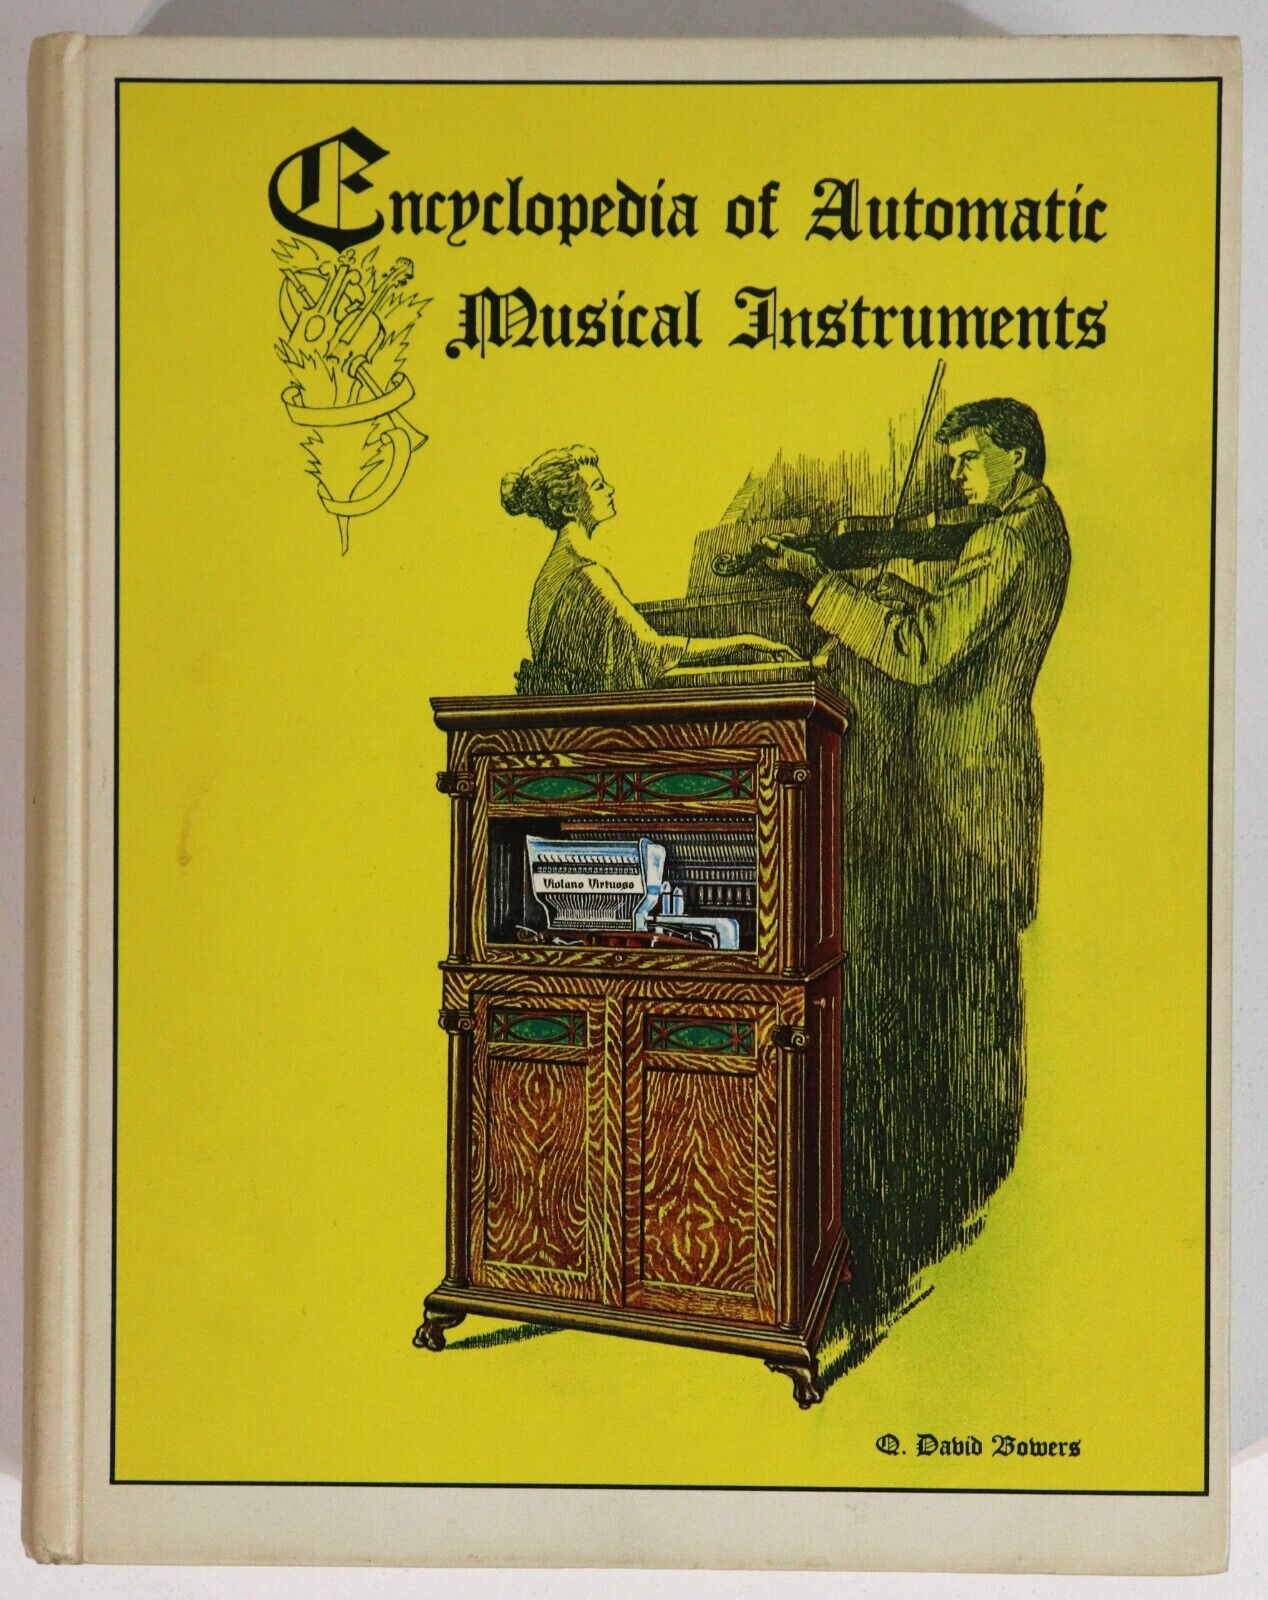 Encyclopedia Of Automatic Musical Instruments - 1977 - Music Reference Book